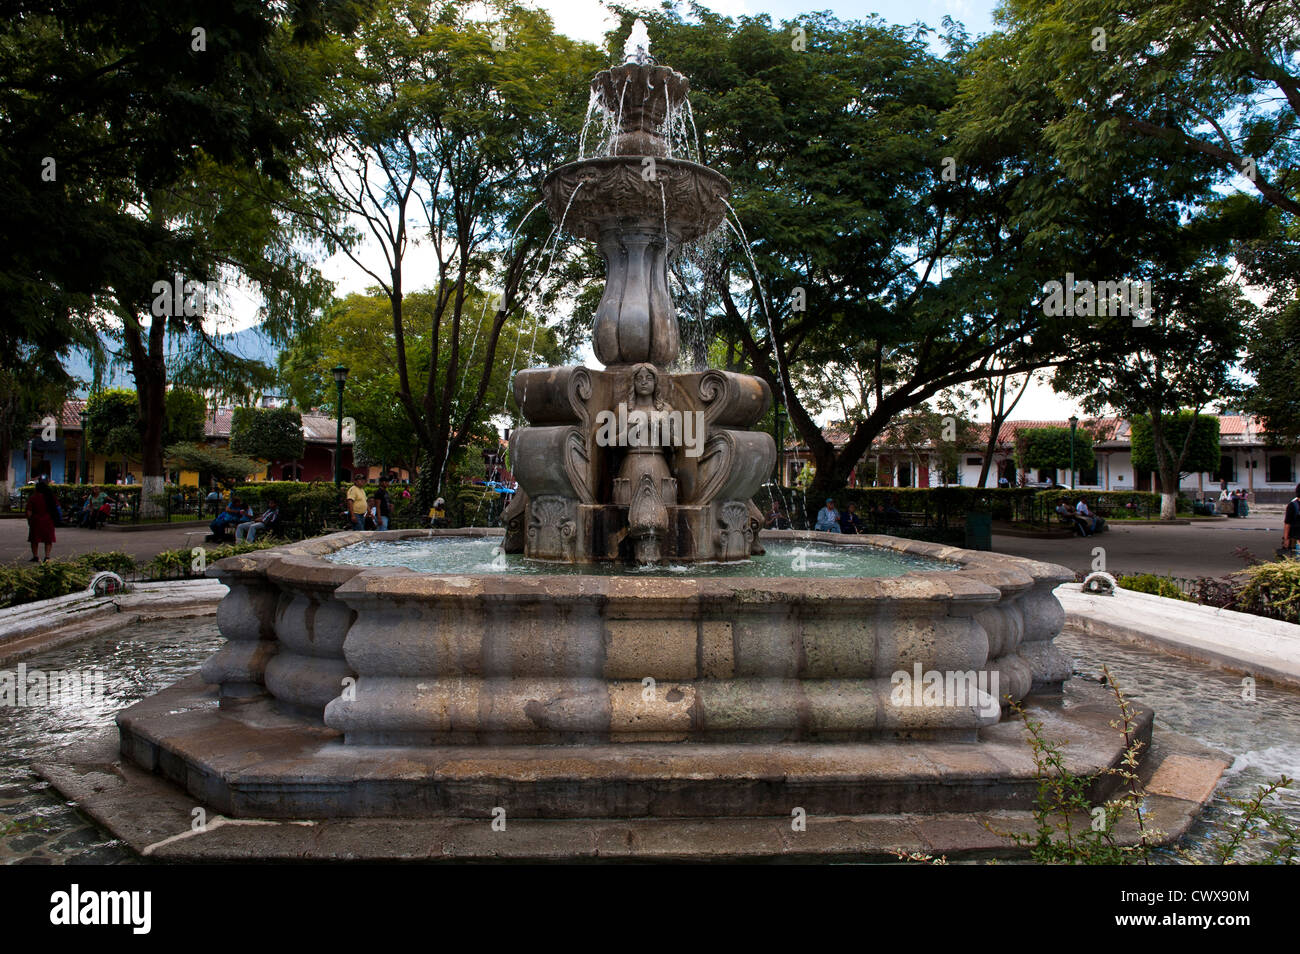 Central Park Fountain of the Mermaids in Antigua, Guatemala, UNESCO World Heritage Site. Stock Photo